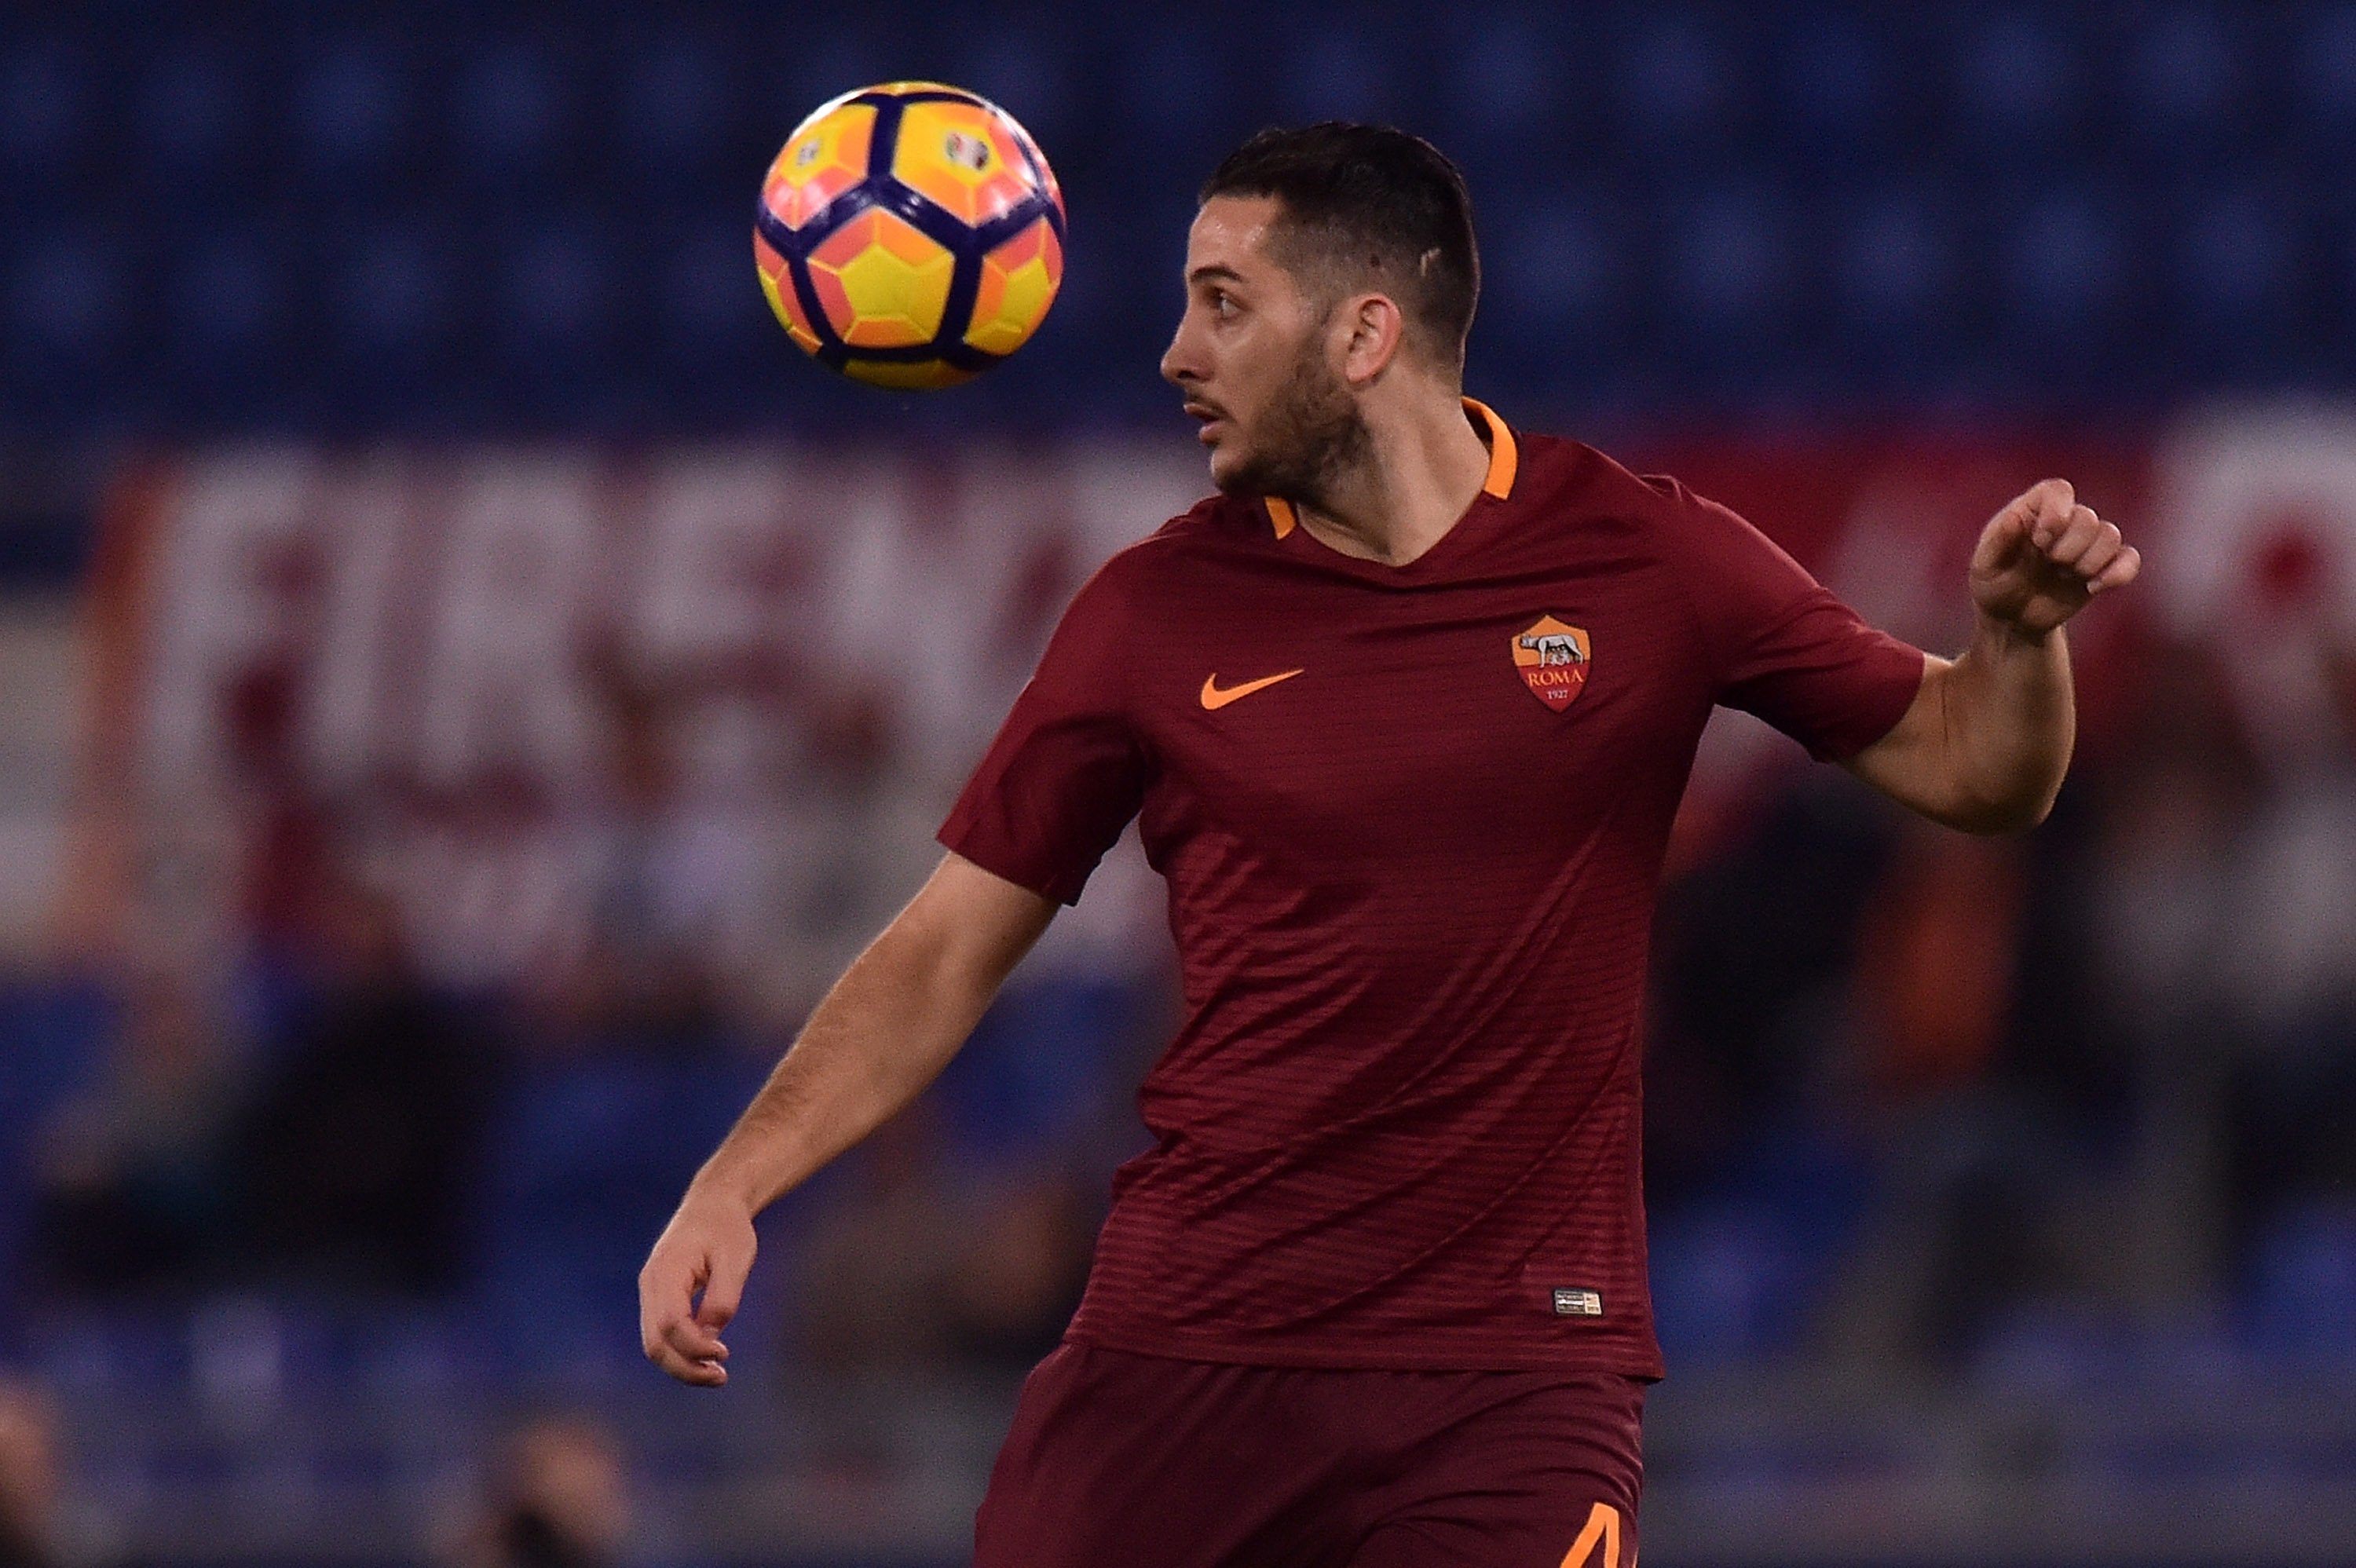 ROME, ITALY - OCTOBER 23: Kostas Manolas of Roma in action  during the Serie A match between AS Roma and US Citta di Palermo at Stadio Olimpico on October 23, 2016 in Rome, Italy.  (Photo by Tullio M. Puglia/Getty Images)